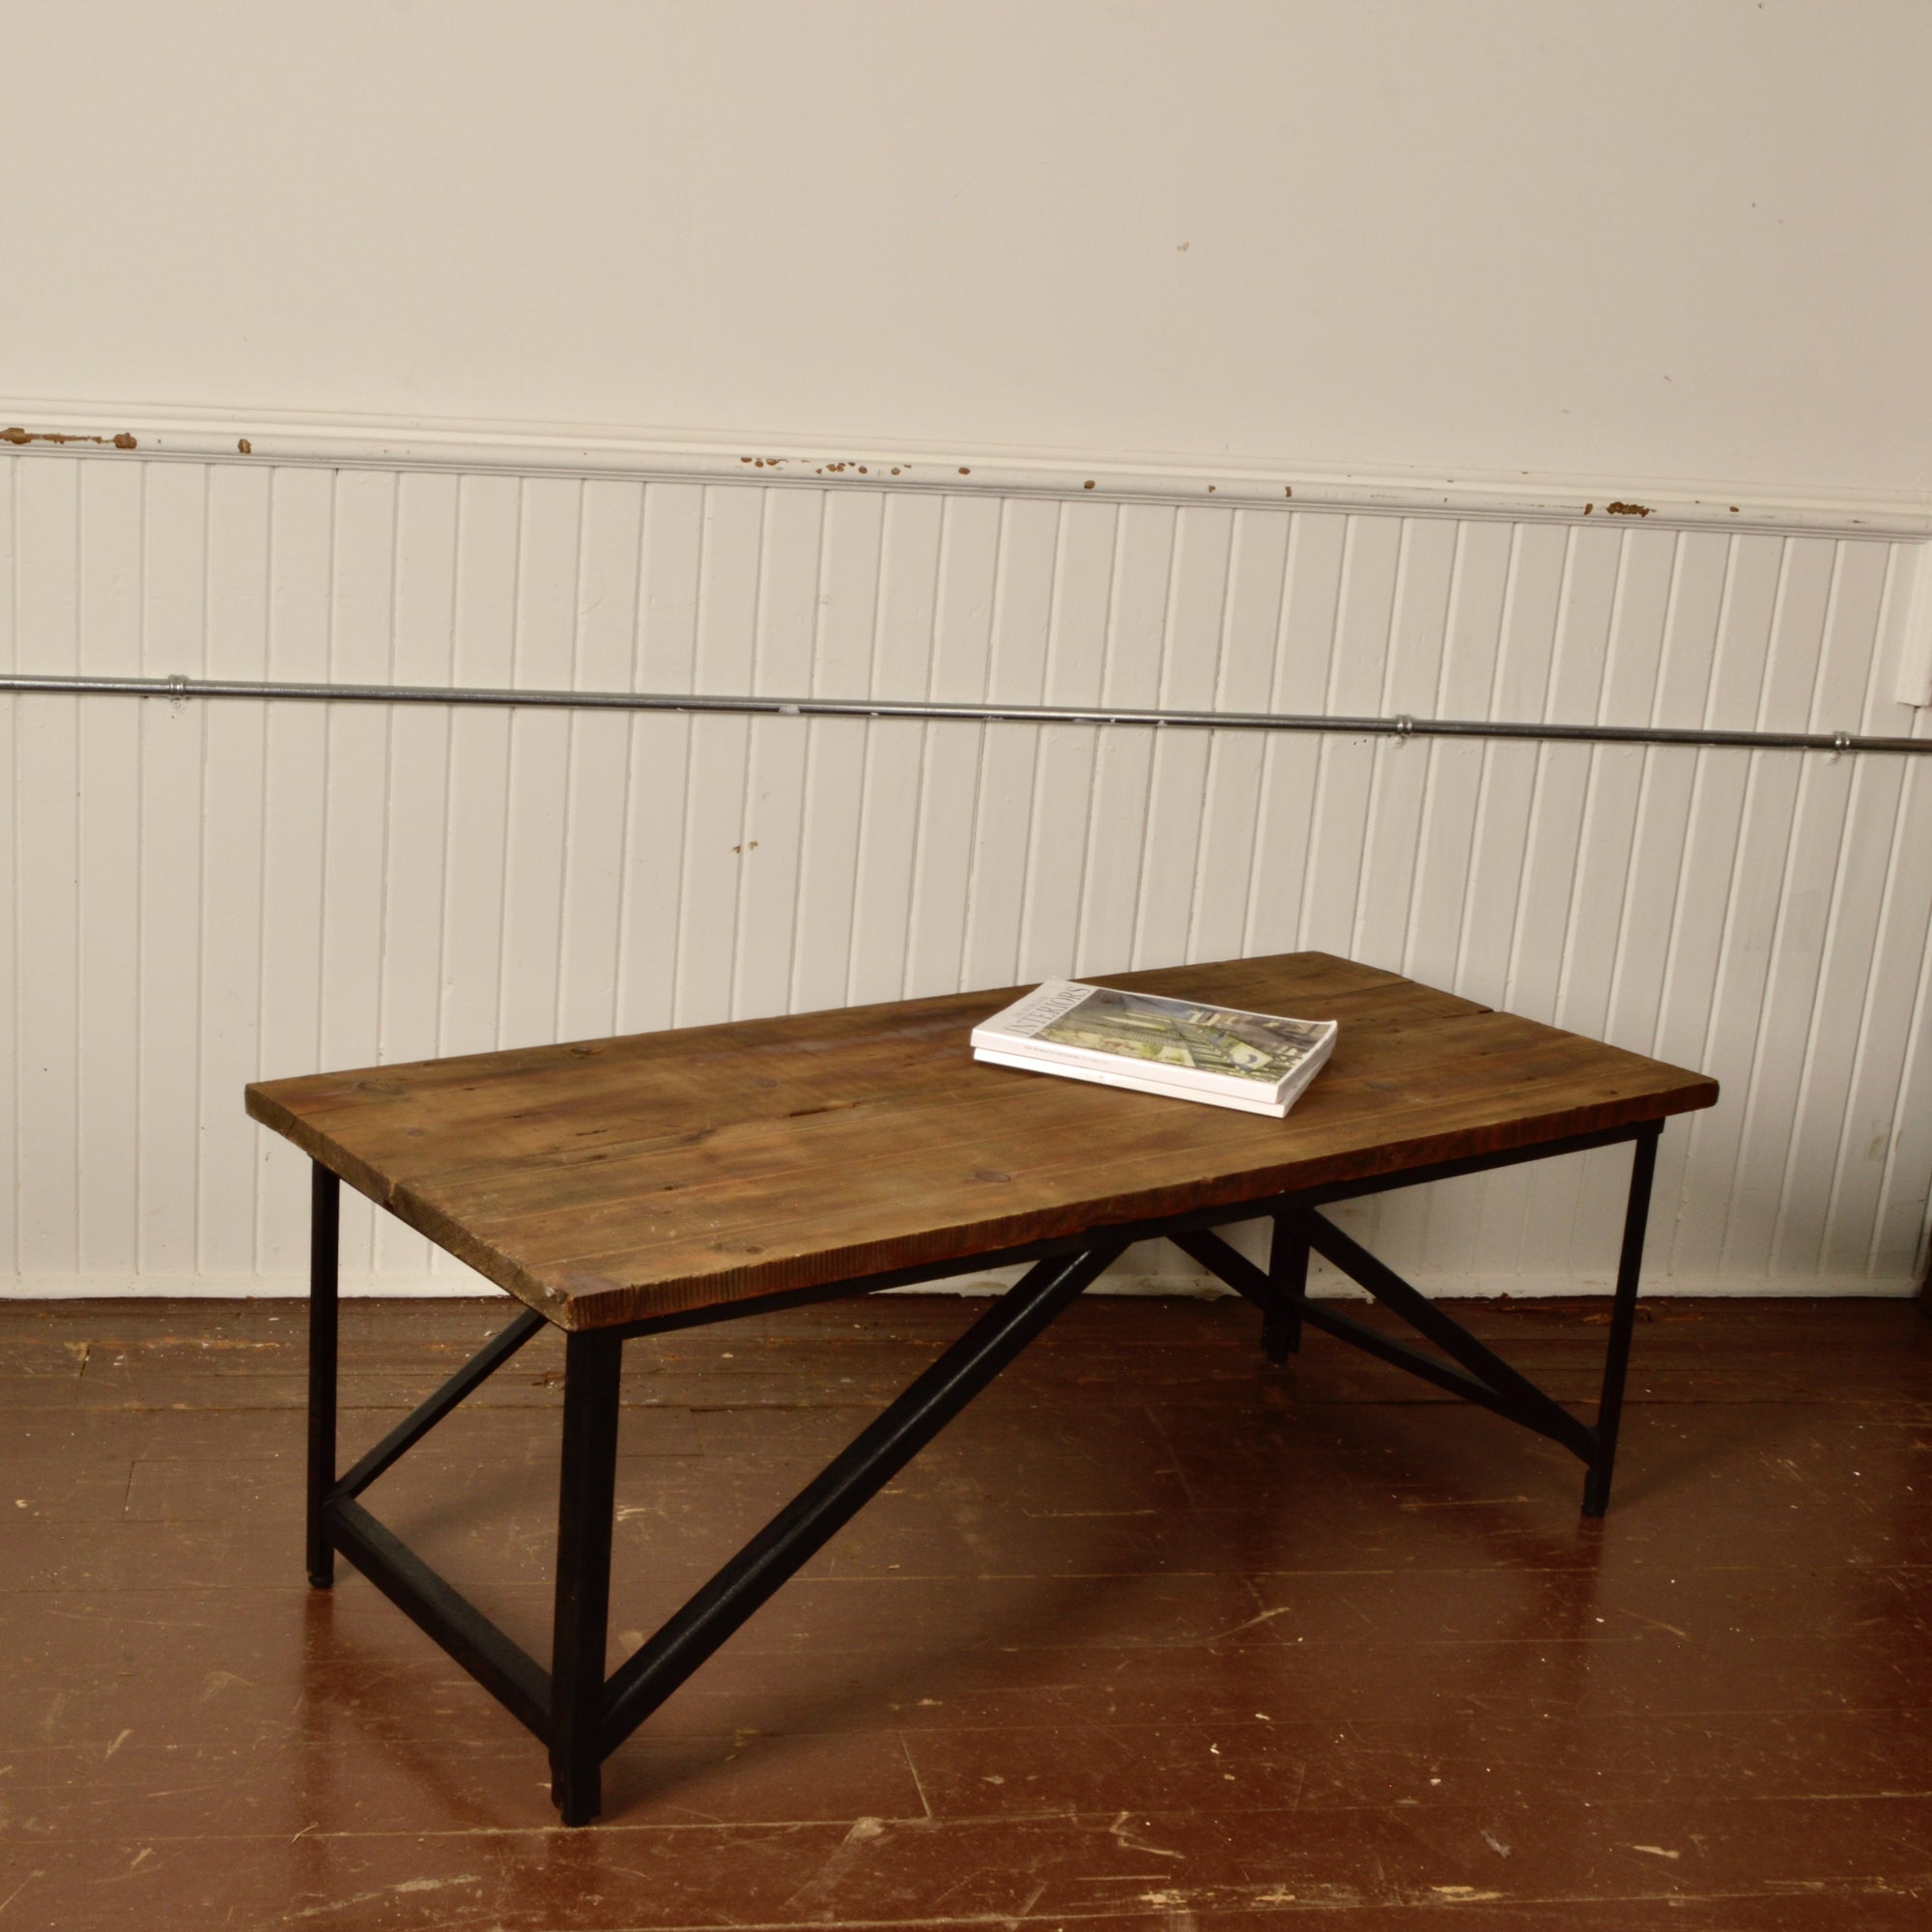 Steel Frame Coffee Table with Pine Board Top Salvage-Garden